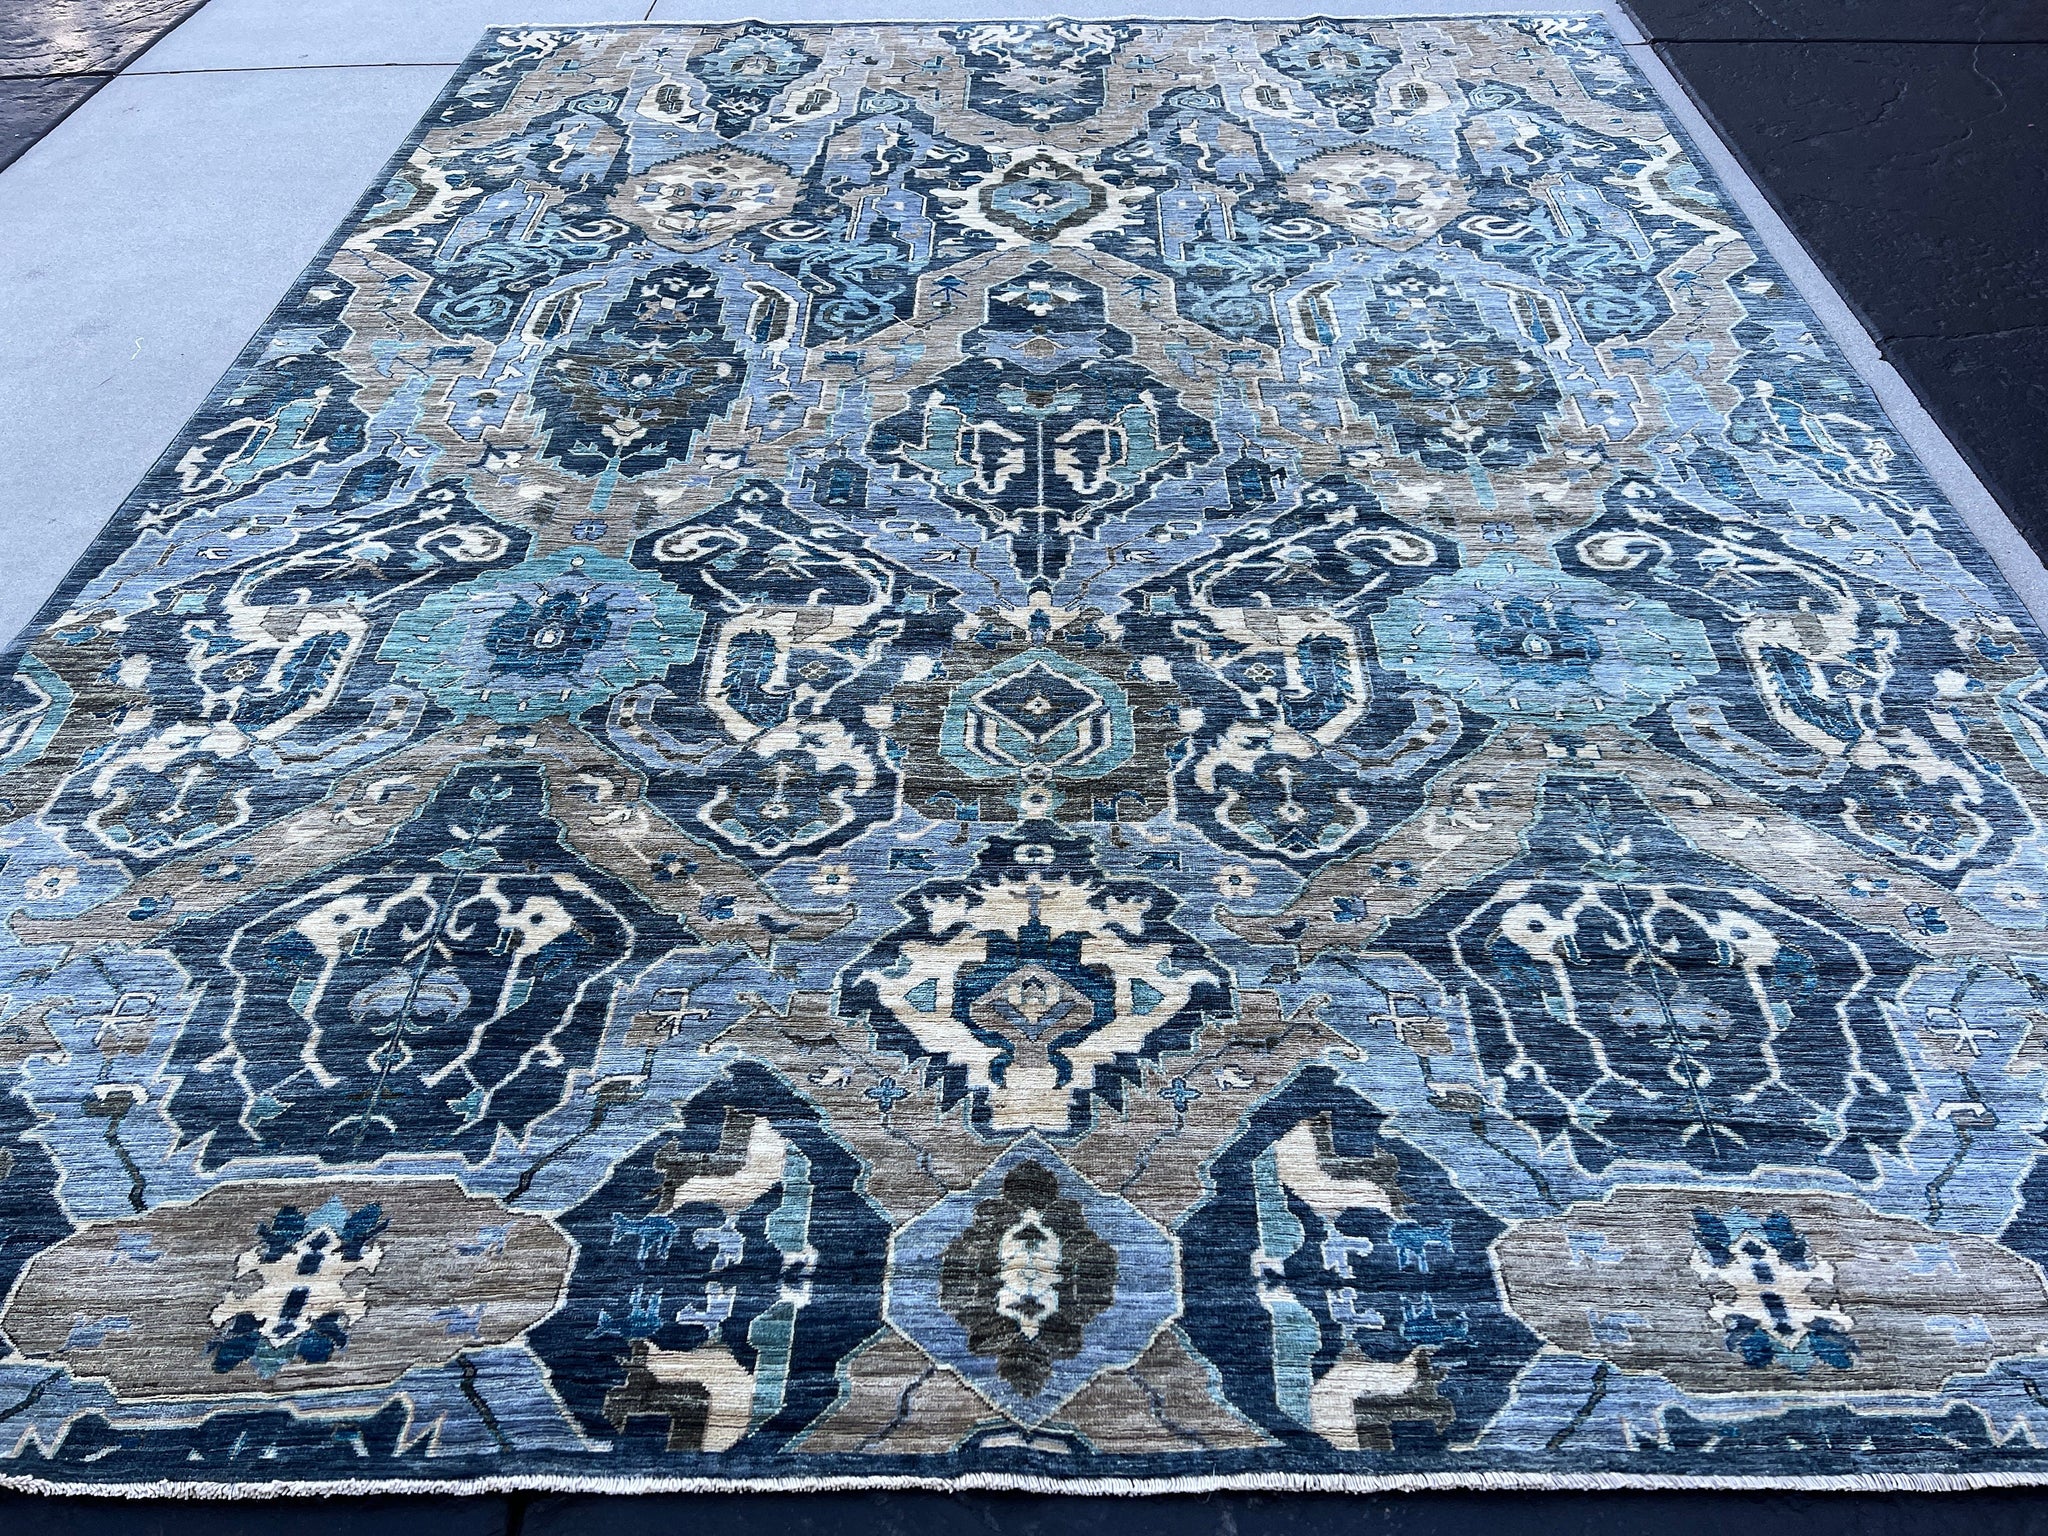 9x12 Fair Trade Handmade Afghan Rug | Charcoal Grey Beige Brown Blue Turquoise Cream Ivory  | Turkish Oushak Hand Knotted Persian Boho